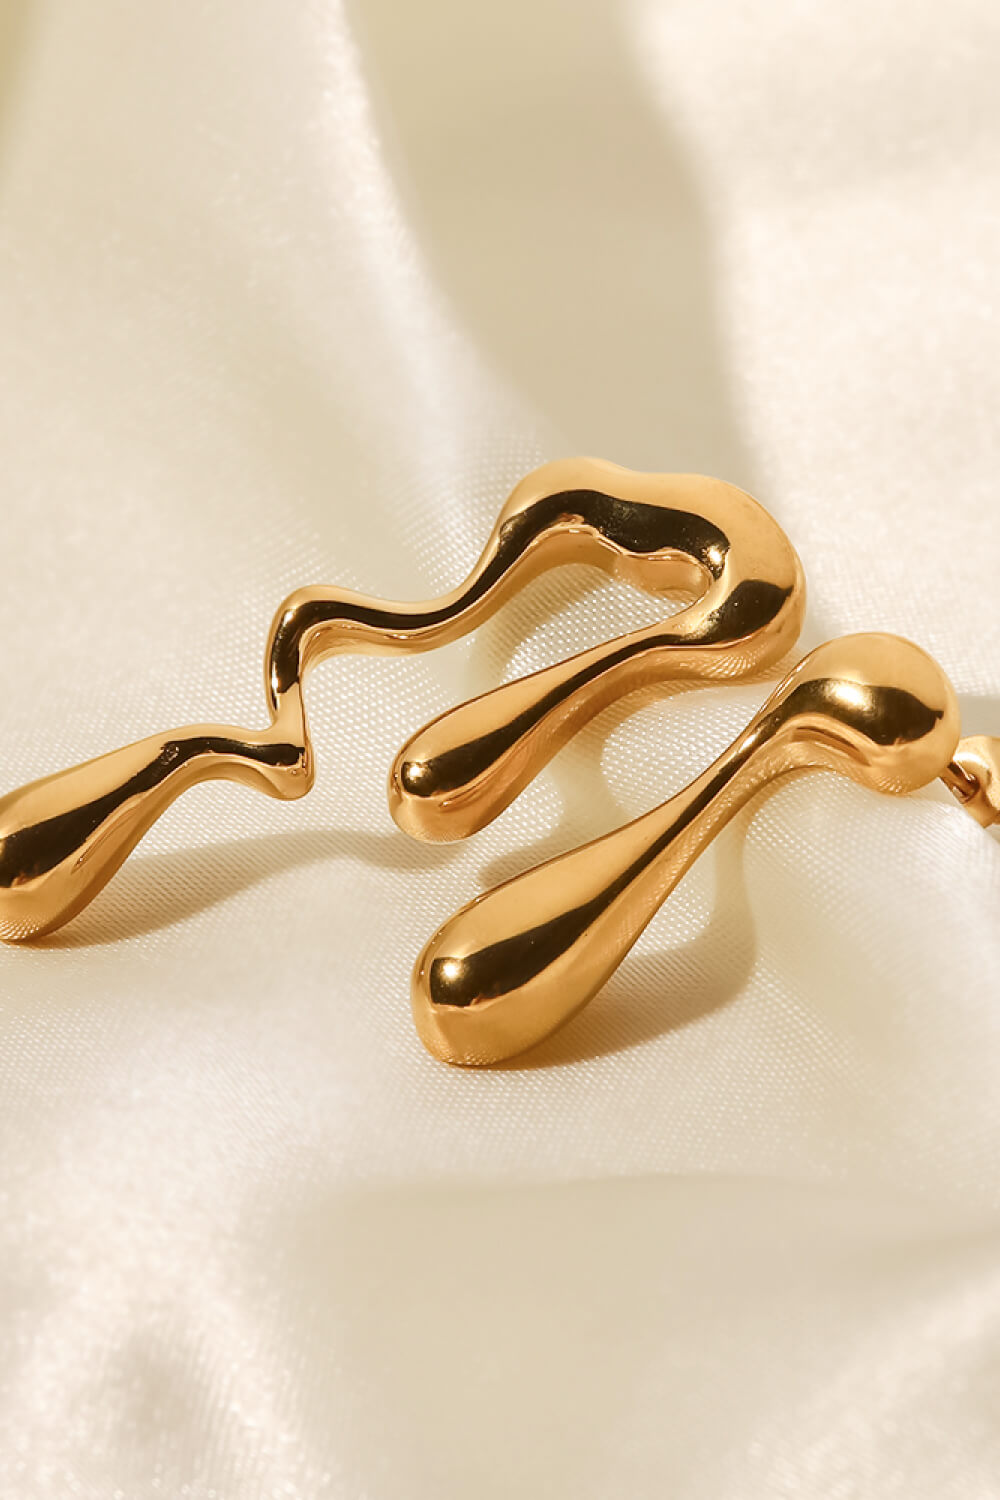 18K Gold Plated Geometric Mismatched Earrings - Earrings - FITGGINS